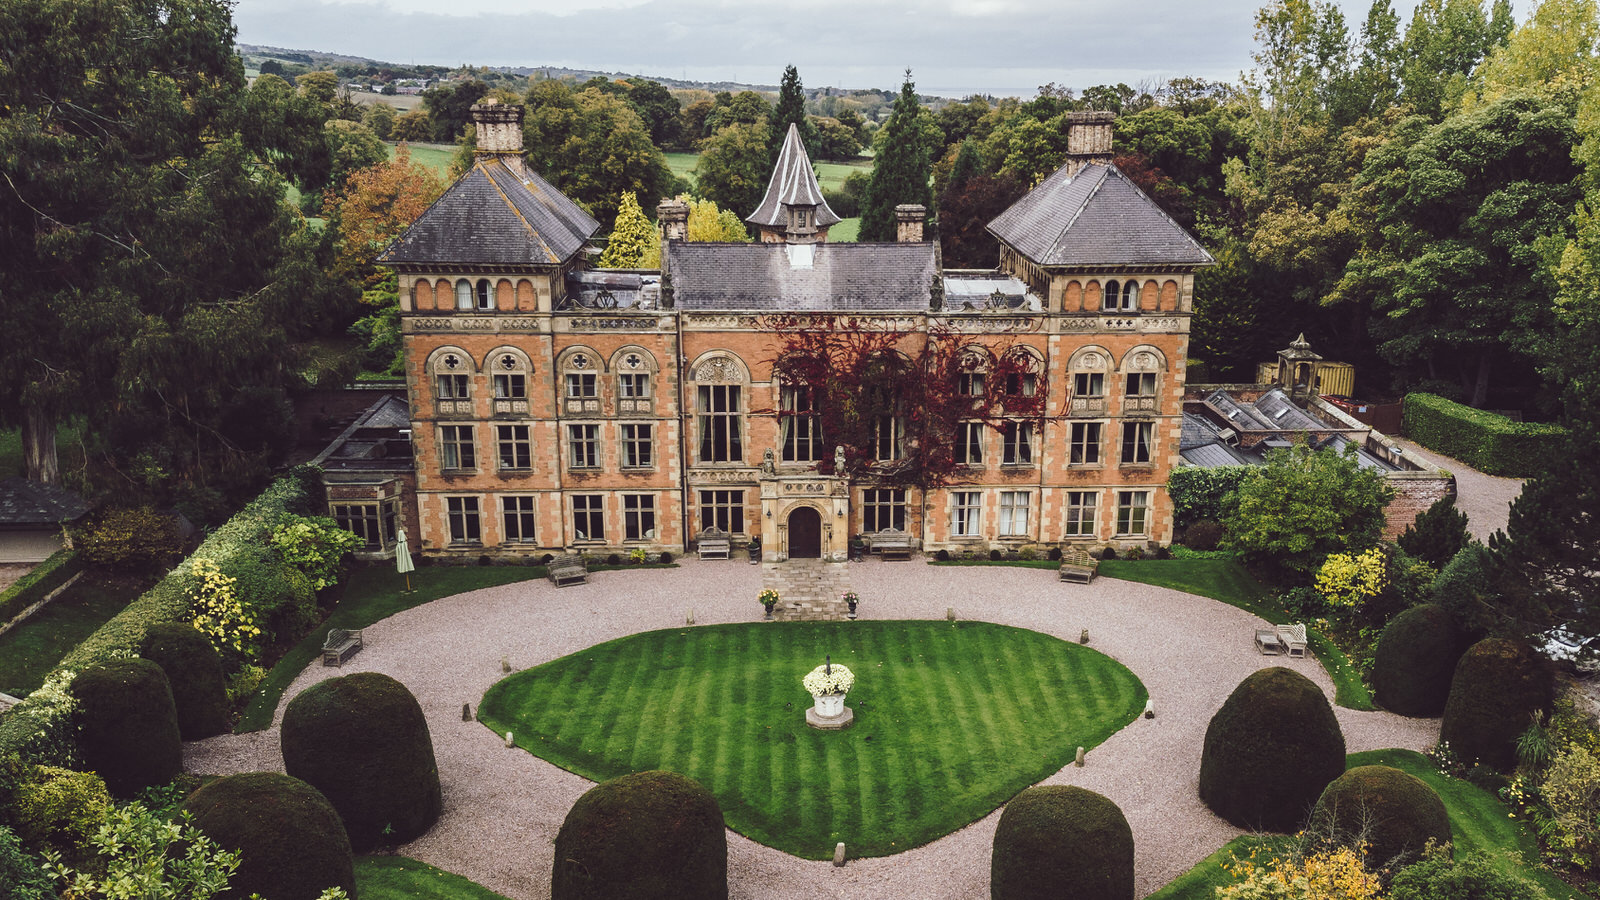 Arial view of Soughton Hall showcasing the architecture and manicured lawns during a wedding day